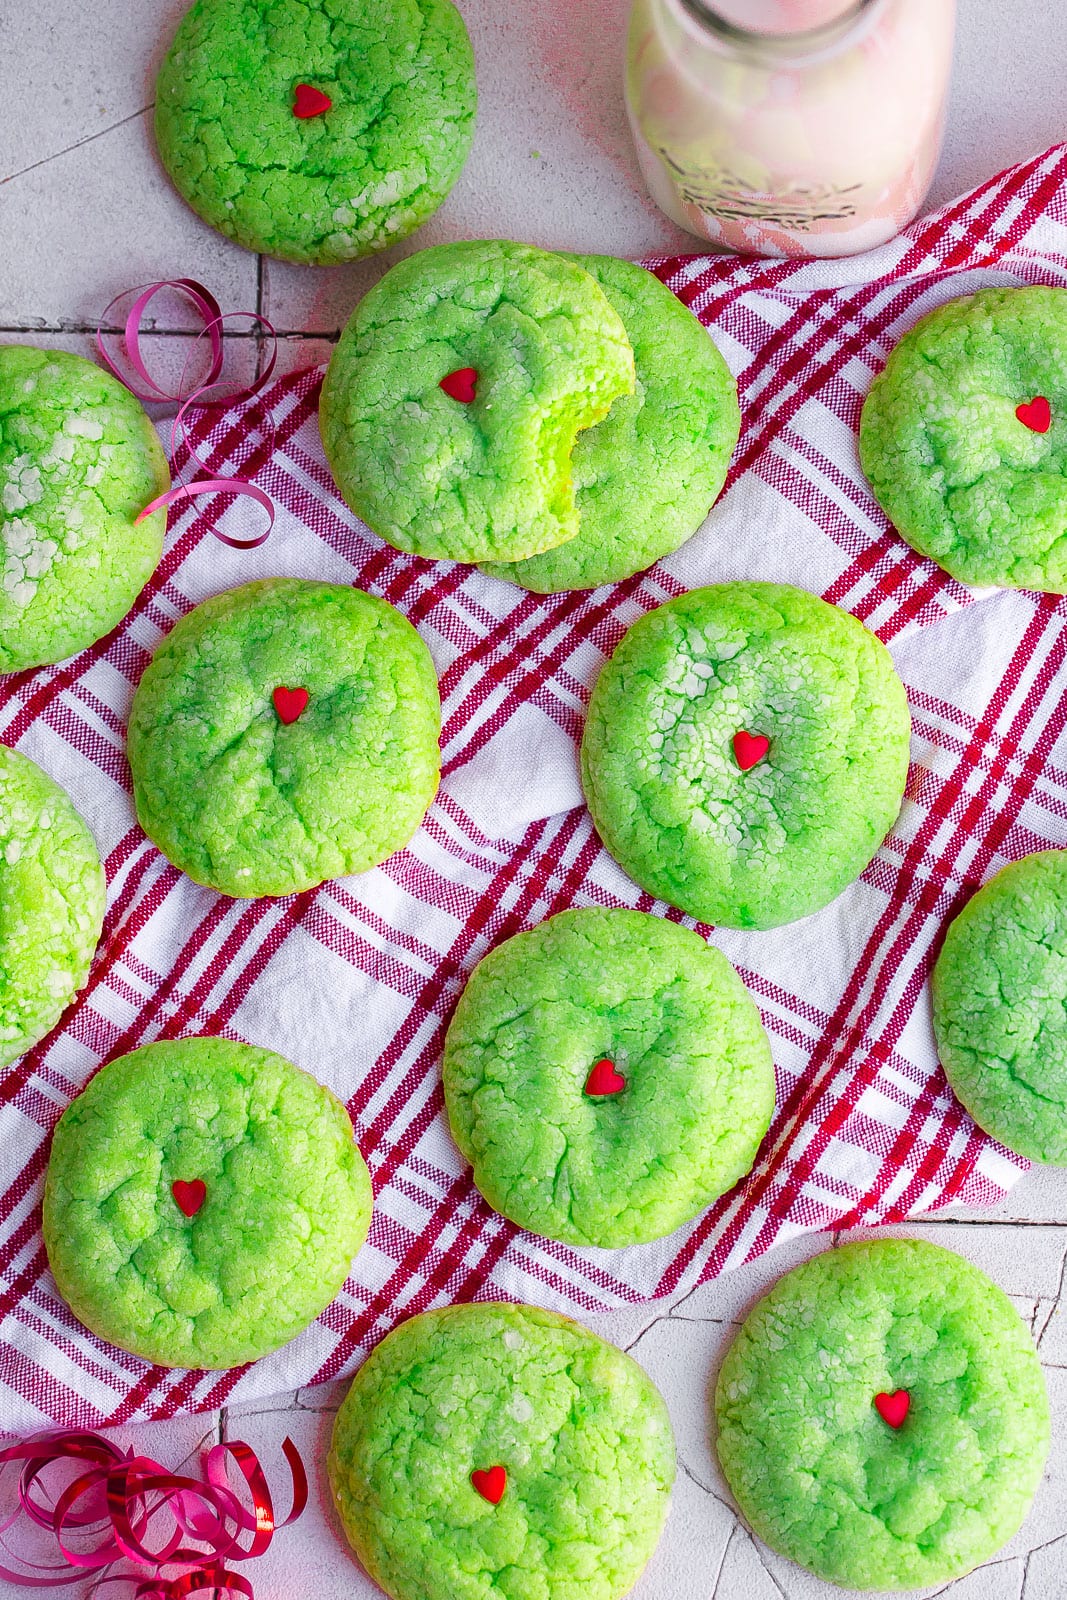 Green Grinch cookies on a red and white plaid kitchen towel.